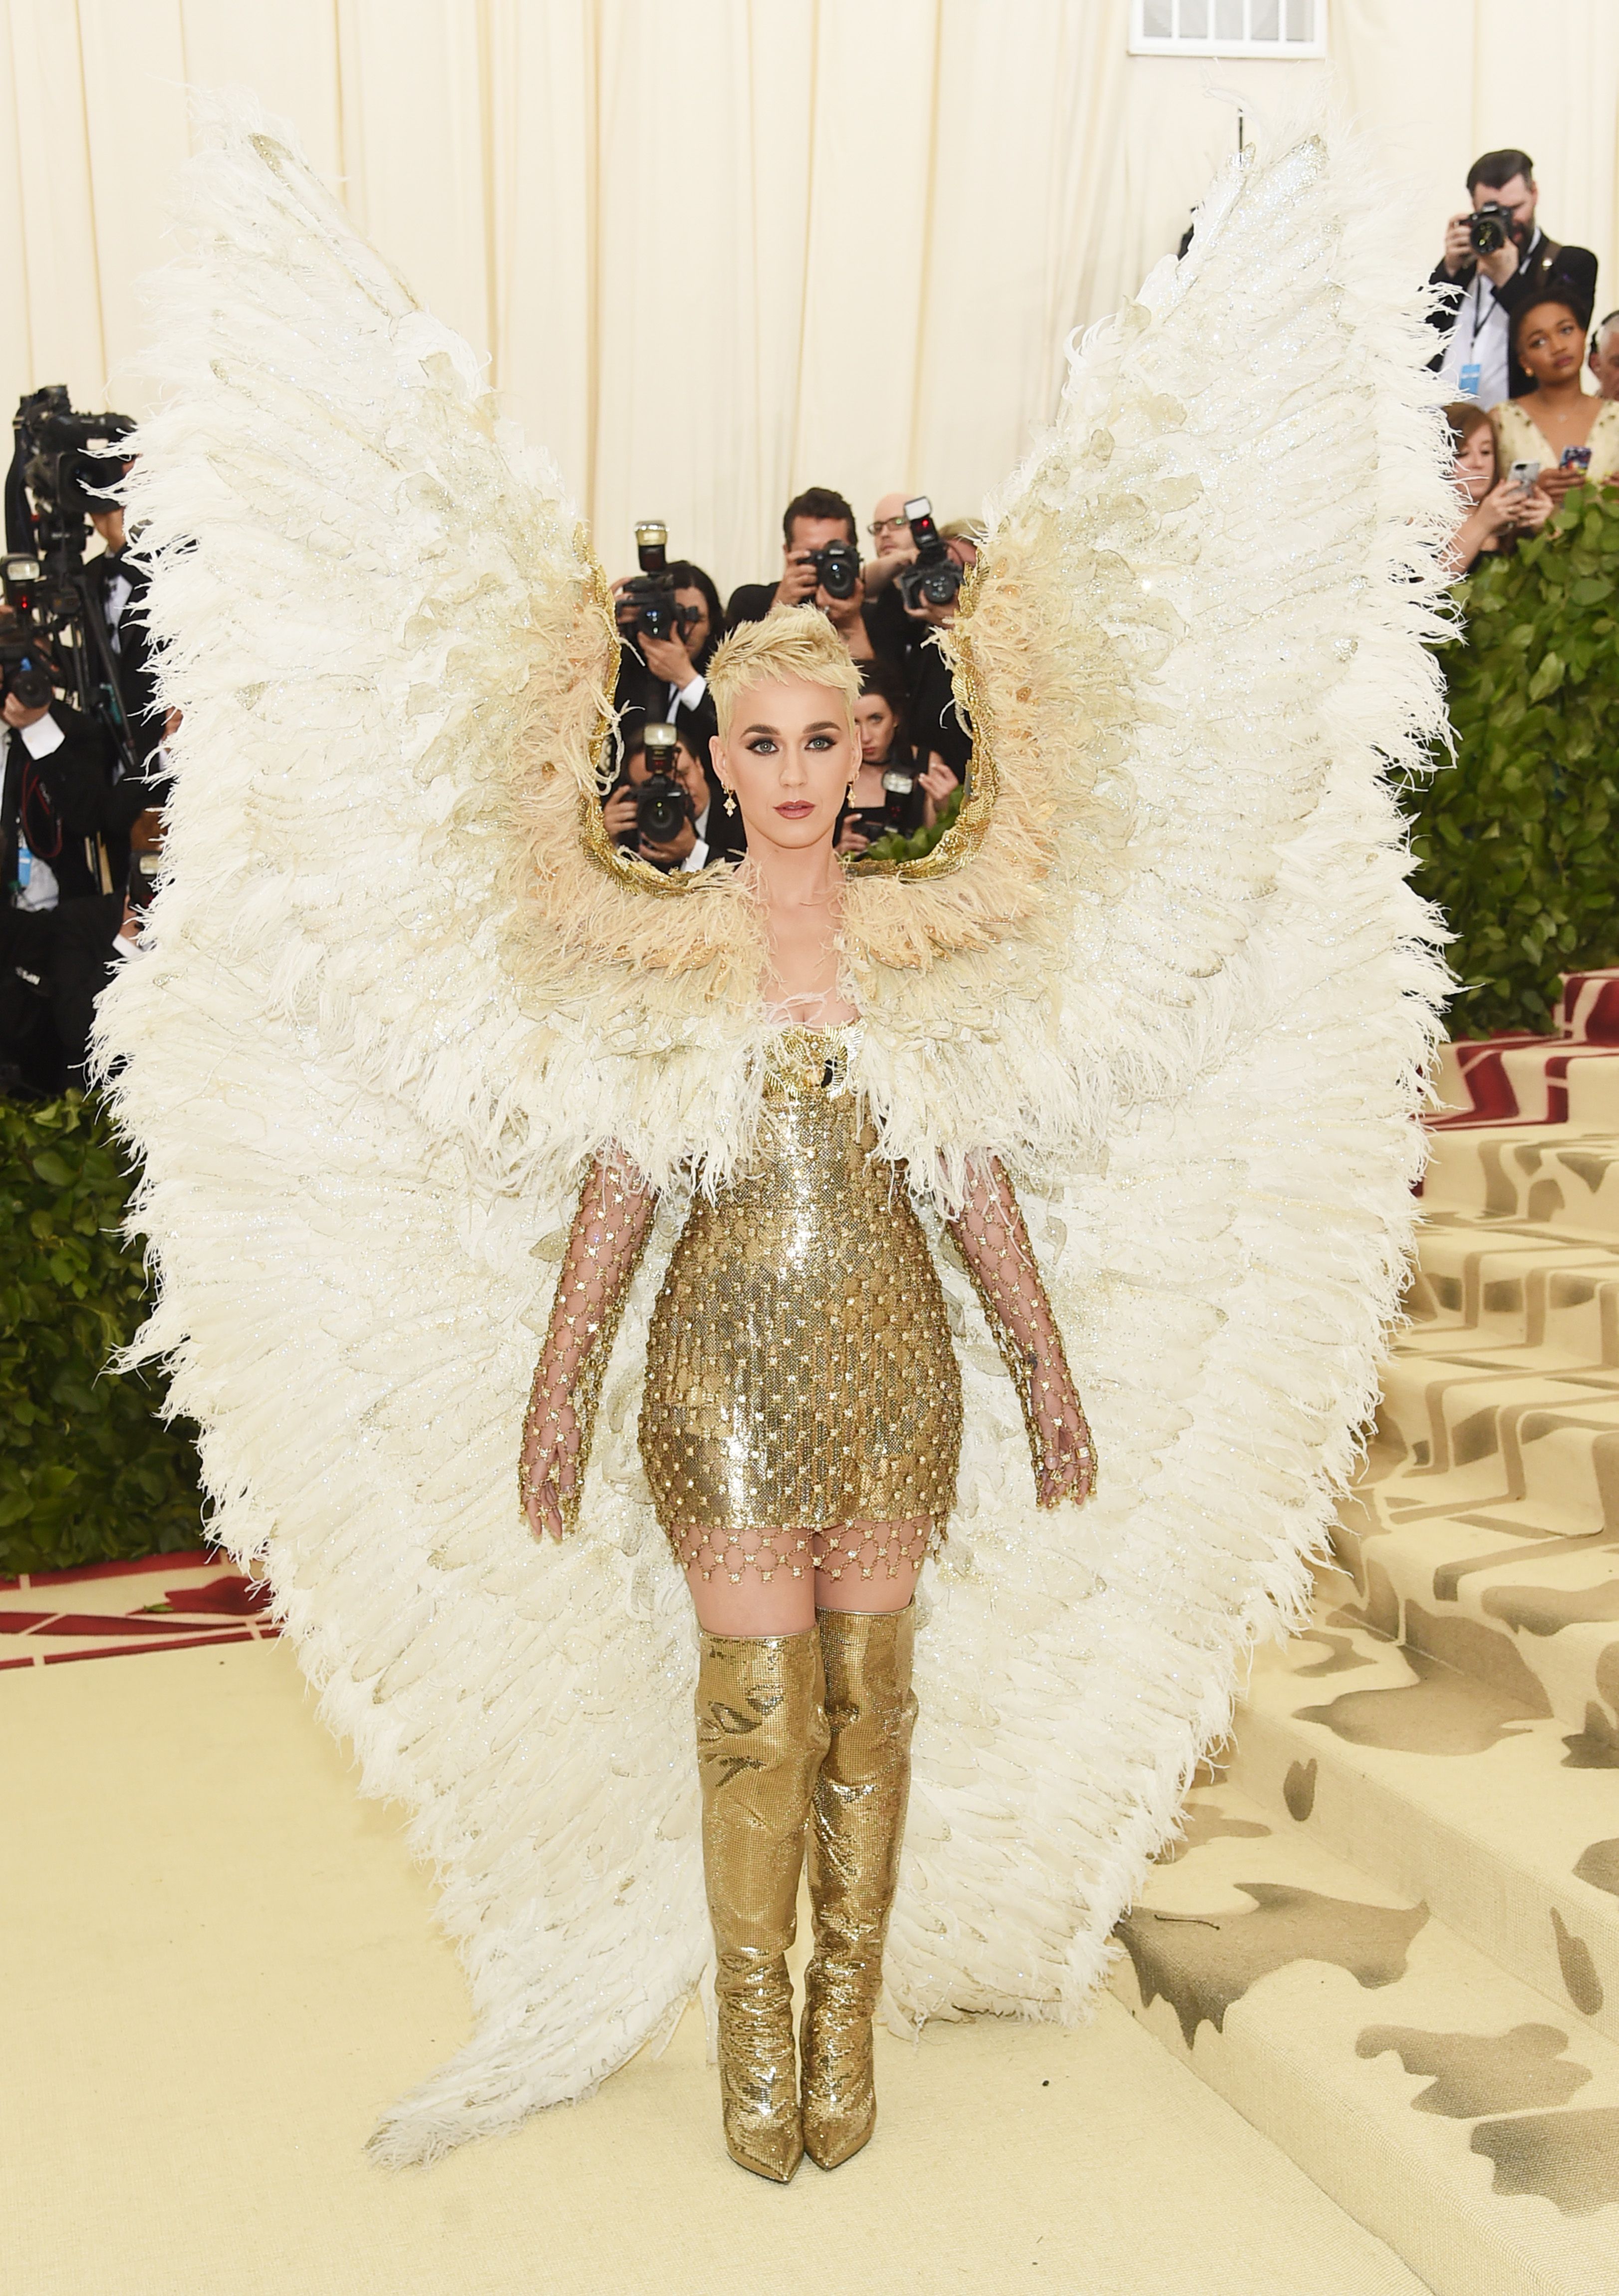 Most Fabulous and Outrageous Met Gala Looks of All Time